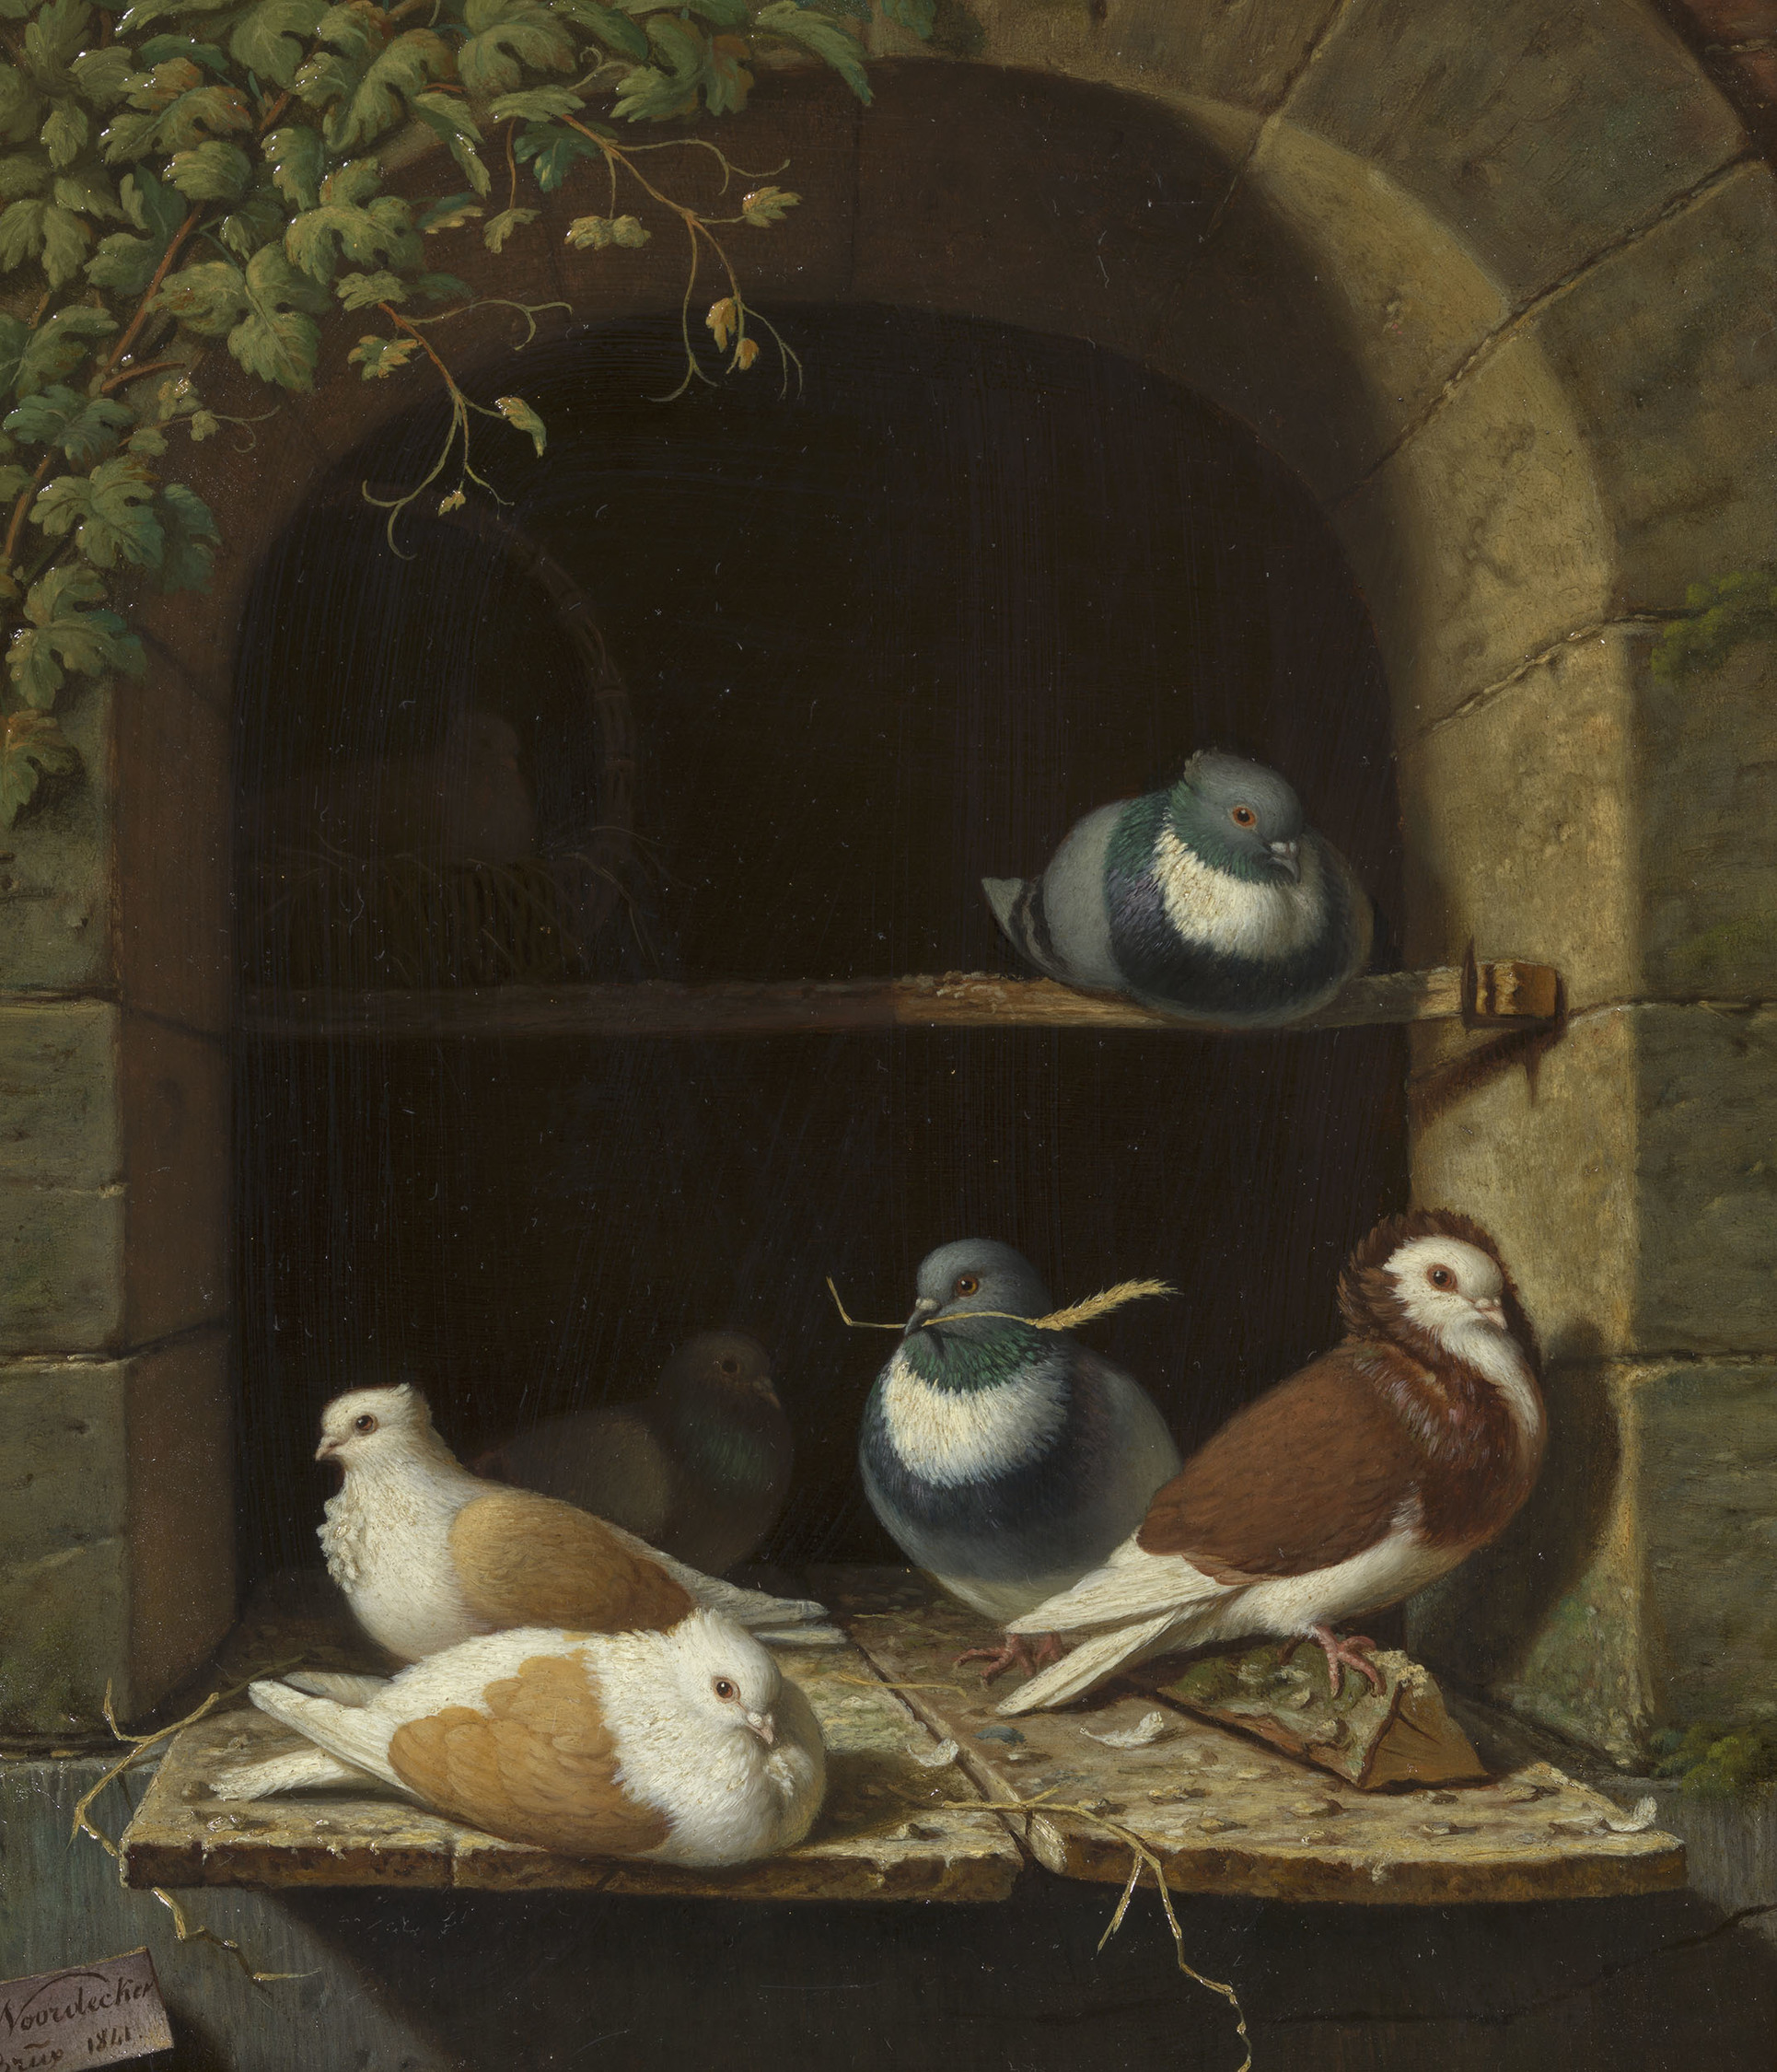 Henri Voordecker (1779-1861) studied with Jean-Baptiste le Roy. He specialized in genre scenes, landscapes and romantic depictions of animals, particularly pigeons. During his lifetime he won acclaim in Britain. His painting The Hunter's Return was bought